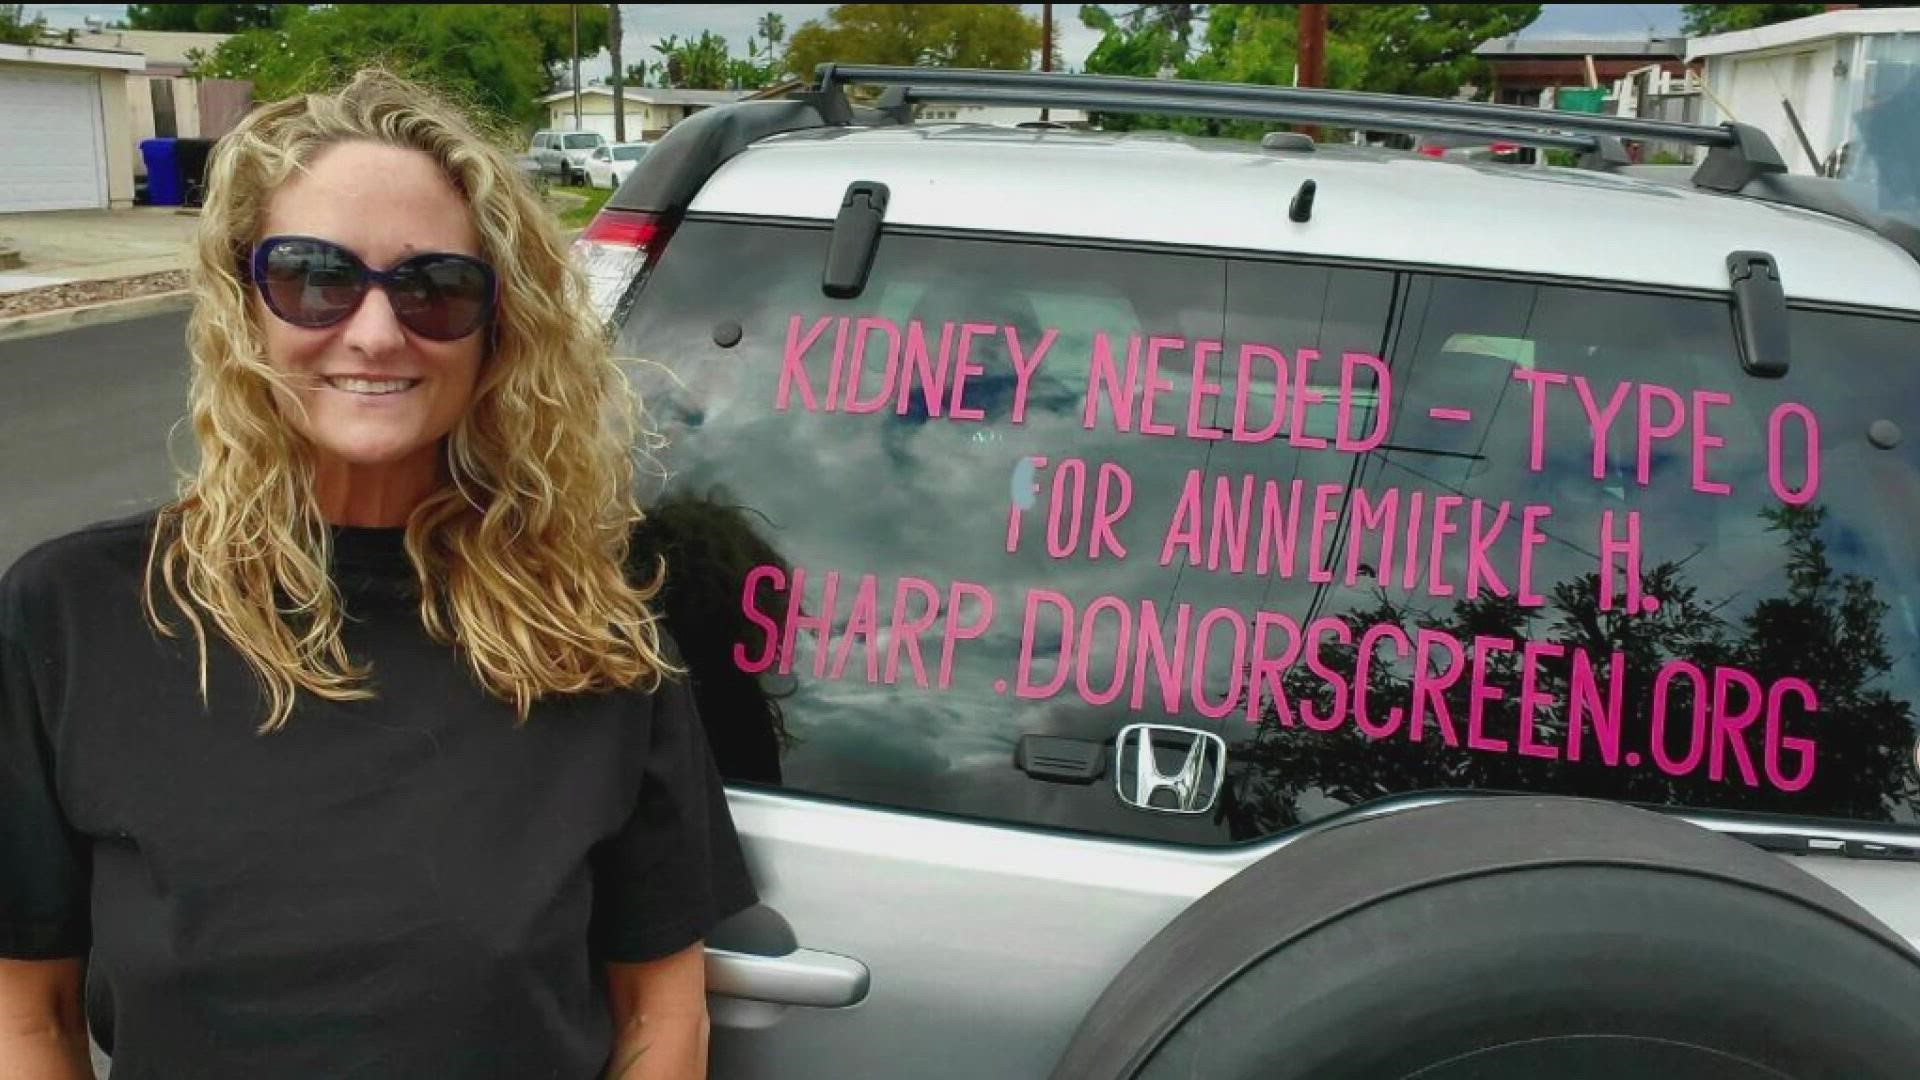 No longer strangers; kidney donor and recipient share incredible story at Sharp Memorial Hospital.